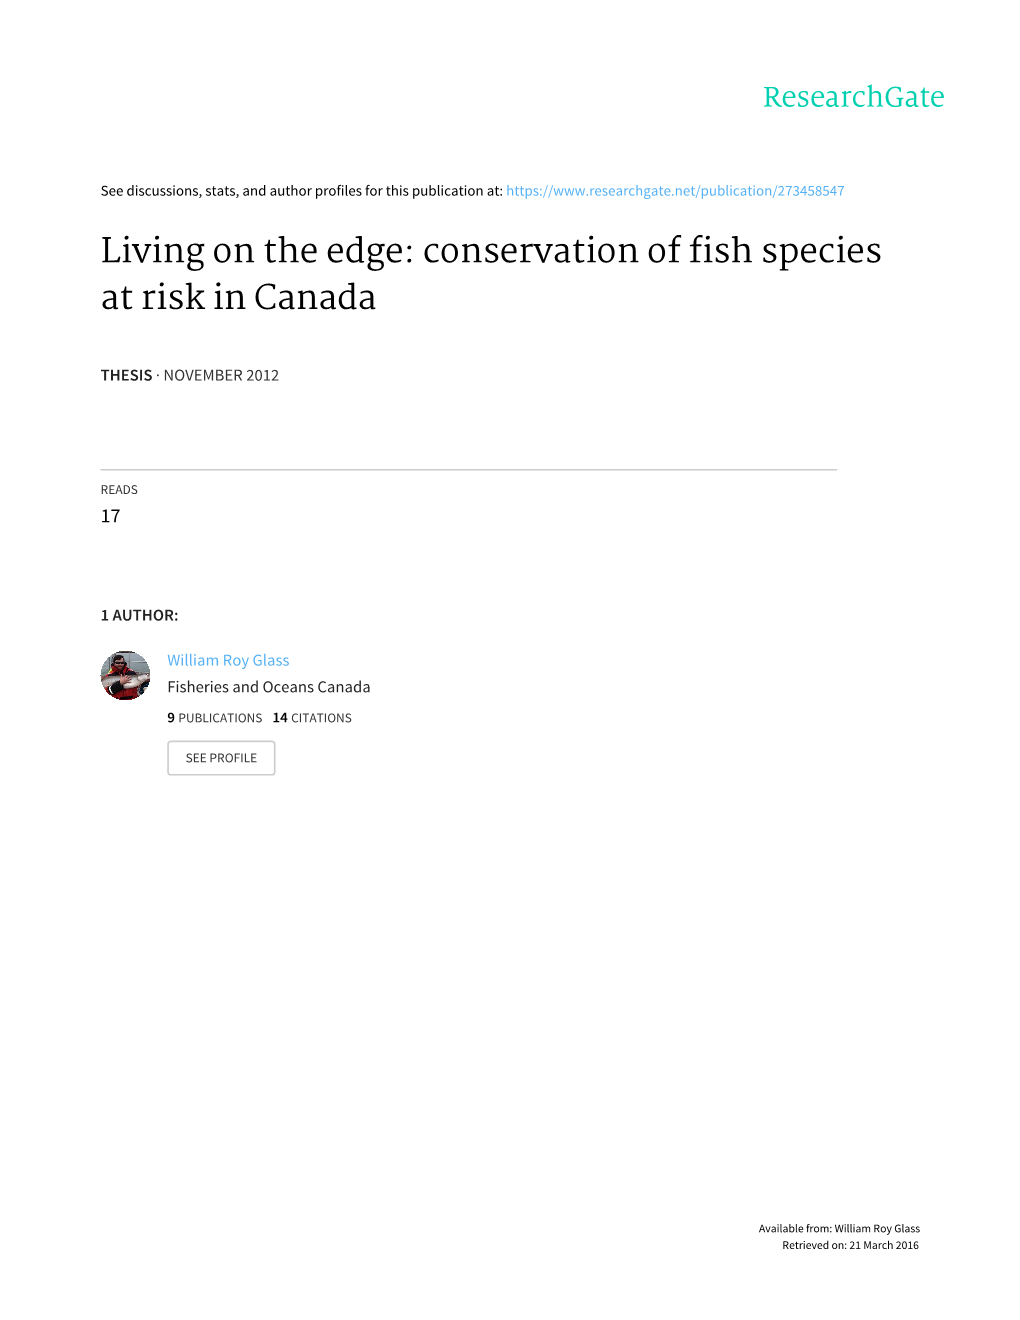 Conservation of Fish Species at Risk in Canada